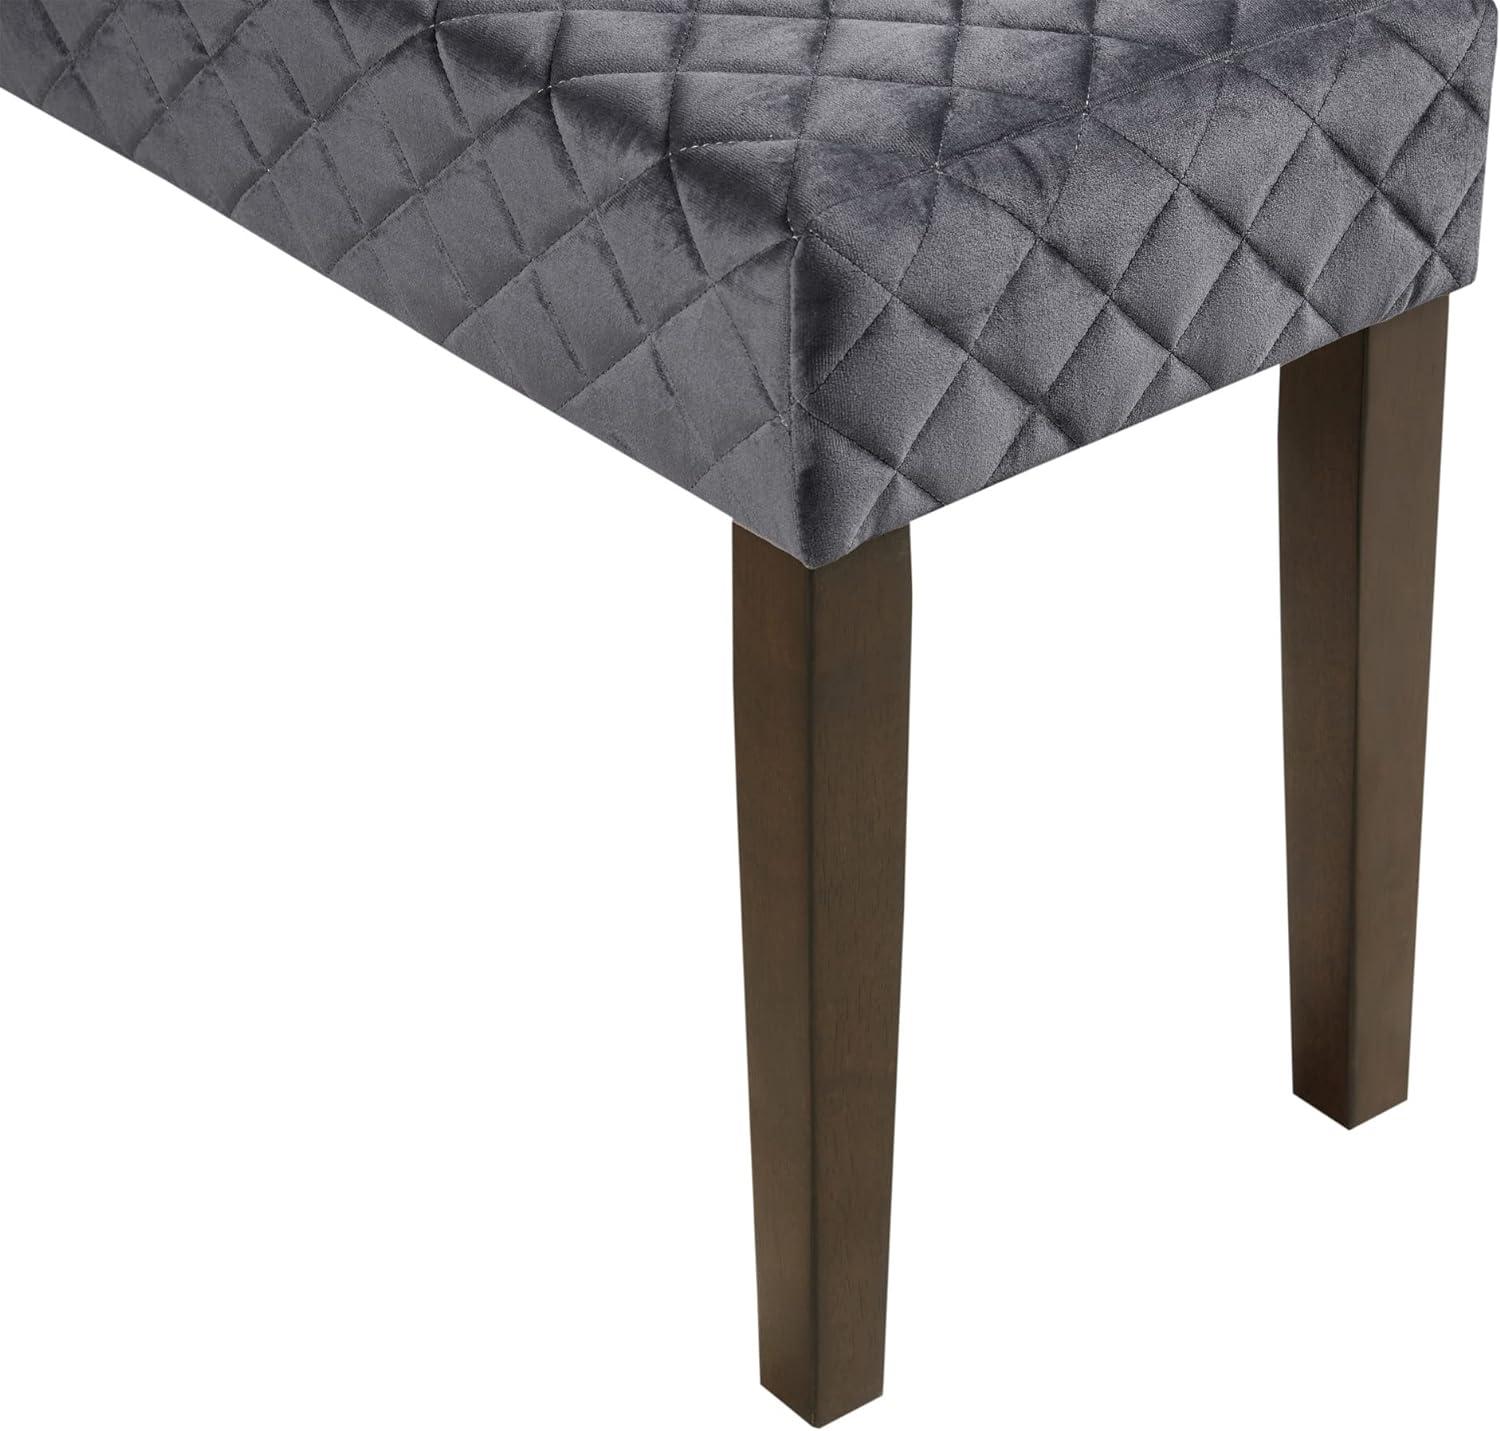 Cheshire Gray Diamond Quilted Upholstered Accent Bench with Moroccan Wood Legs